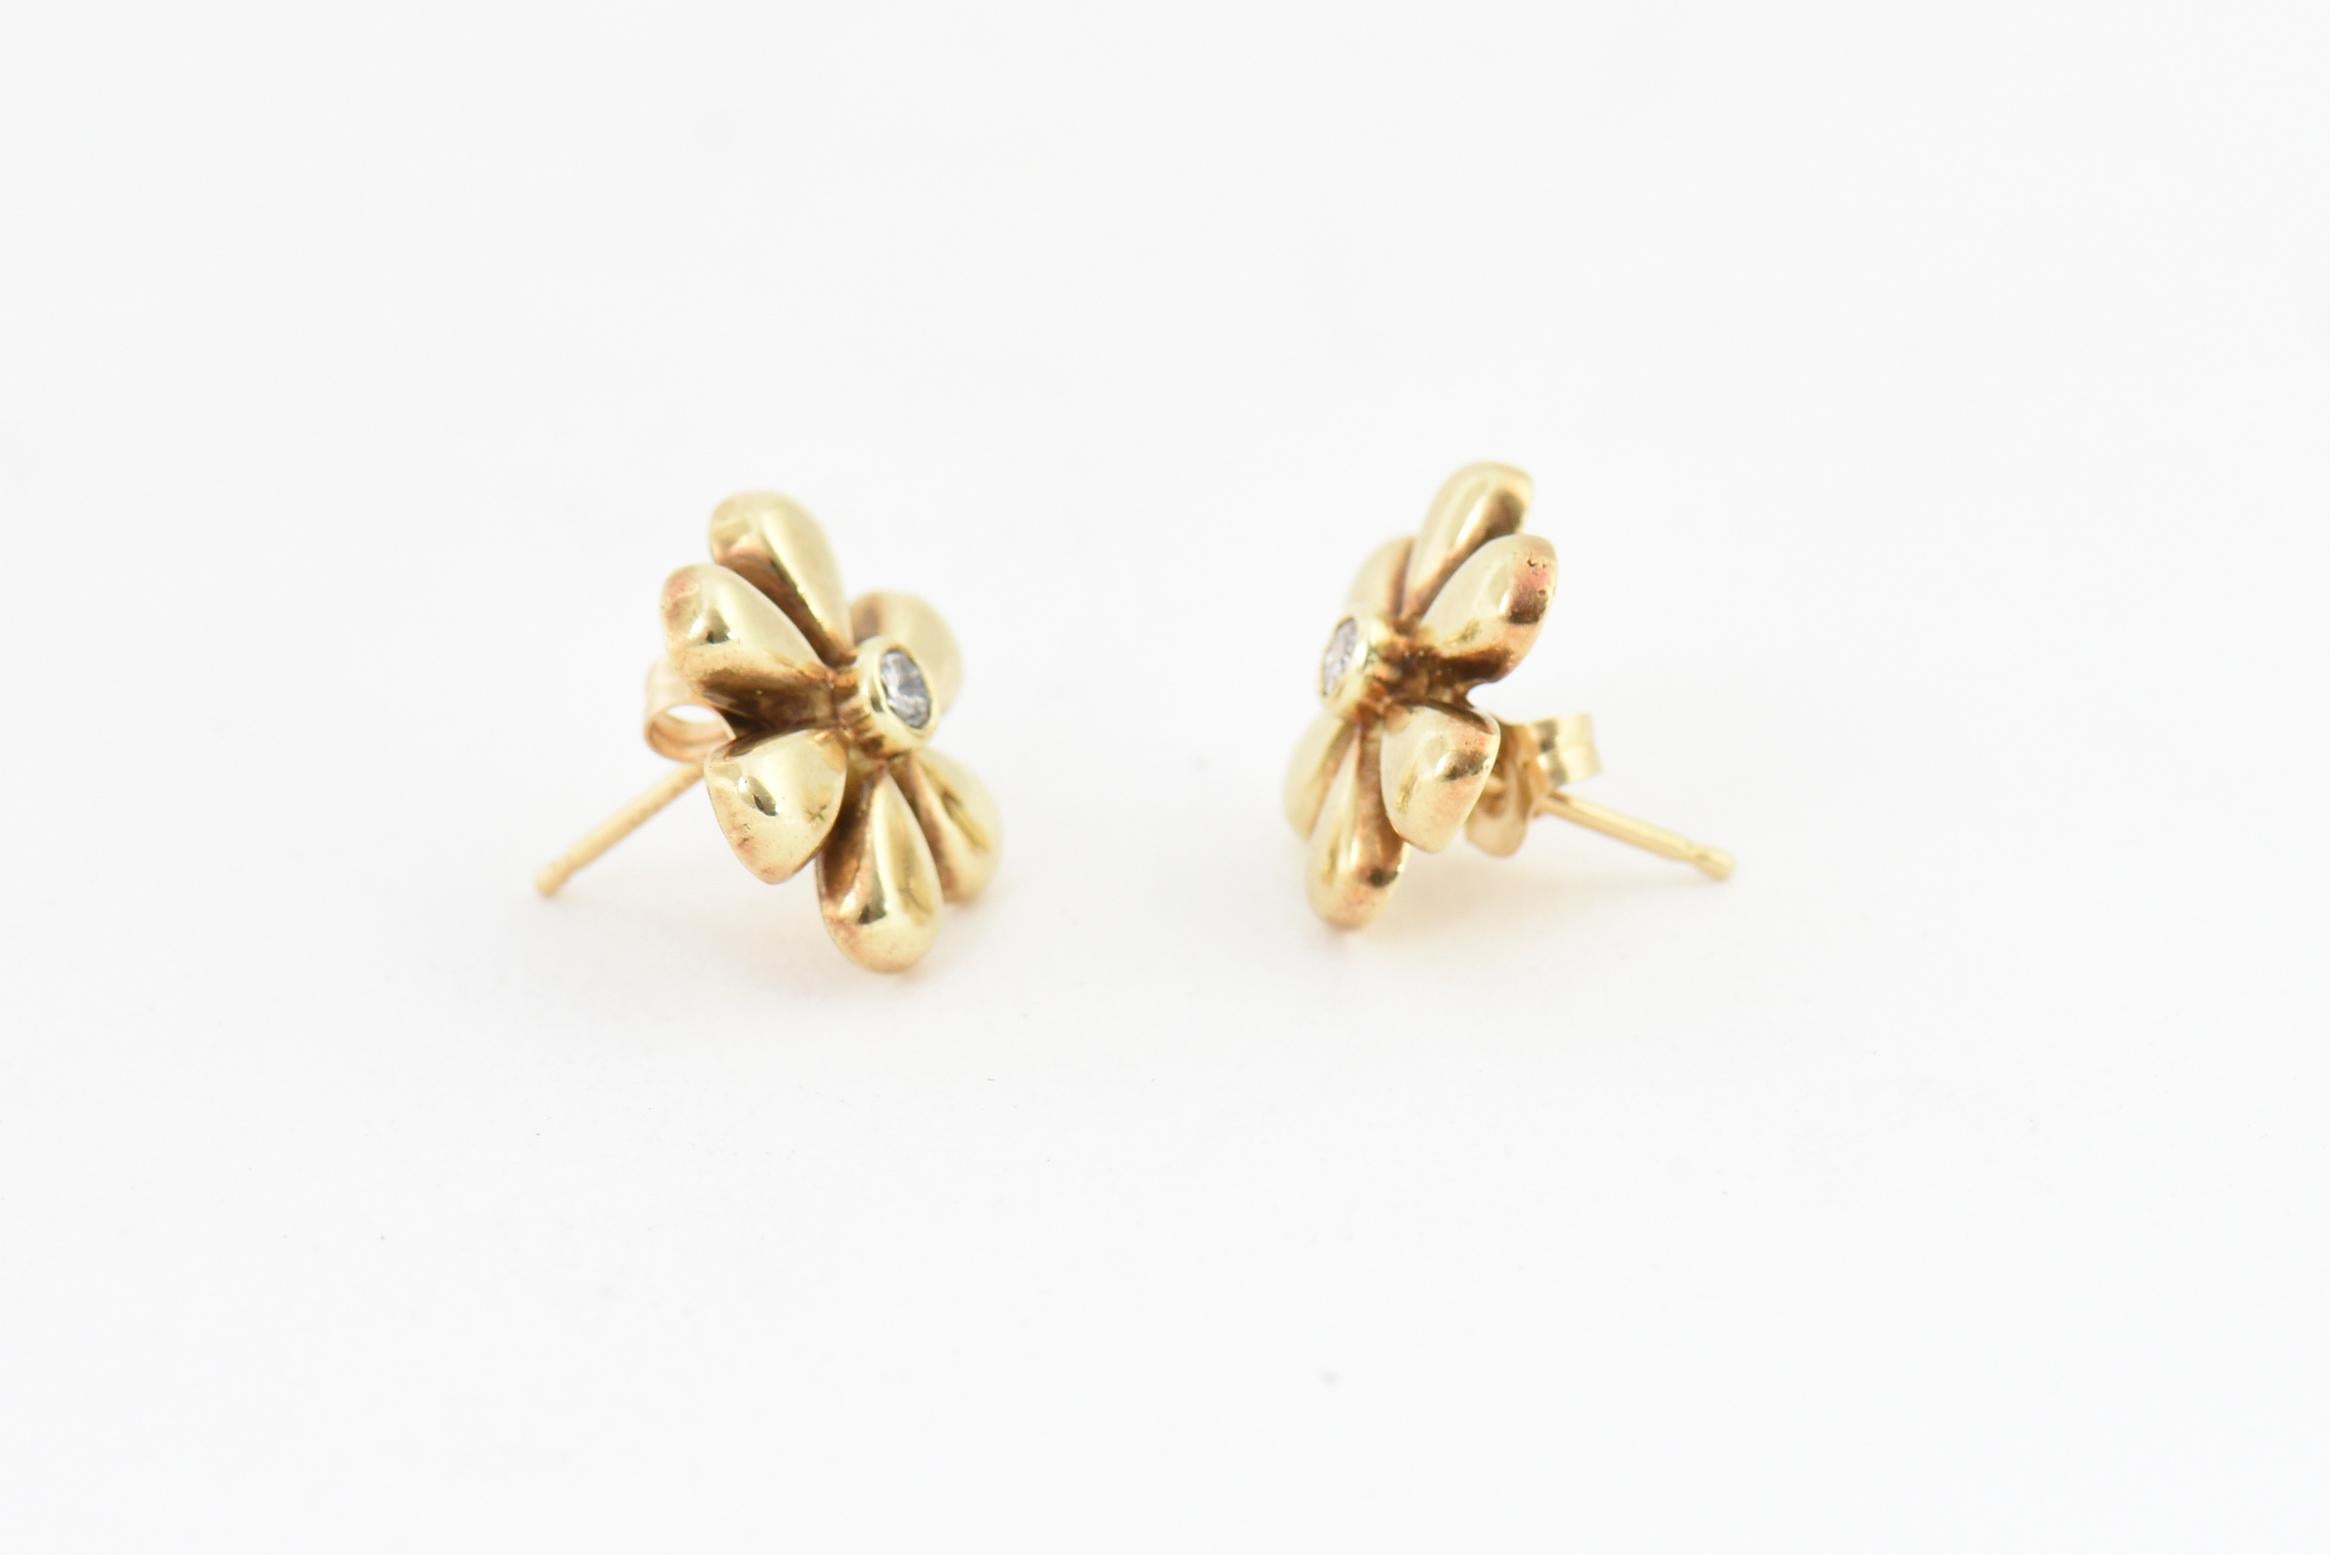 14K yellow gold daisy earrings set with a .07 carat diamond in the center of each. Post backs. Marked: 14K.